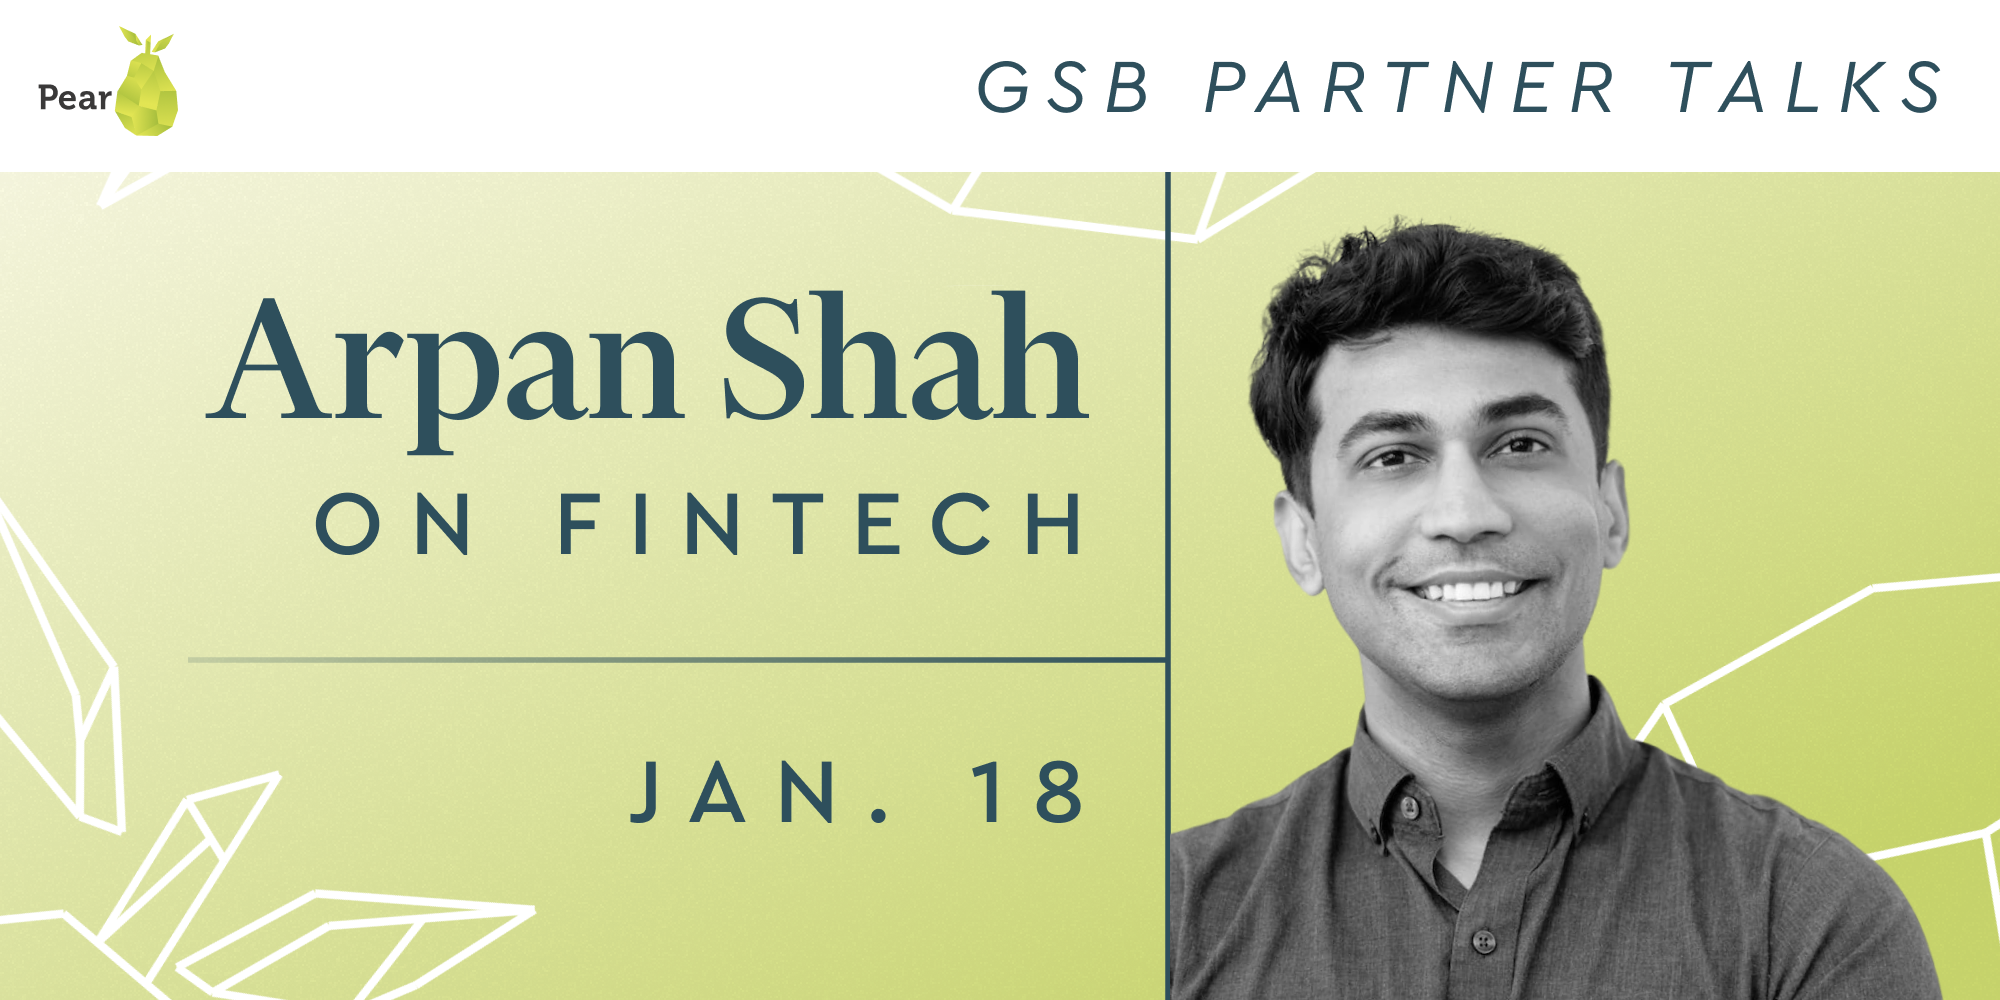 resources GSB Partner Talks: What’s Happening in Fintech? With Pear VC’s Arpan Shah